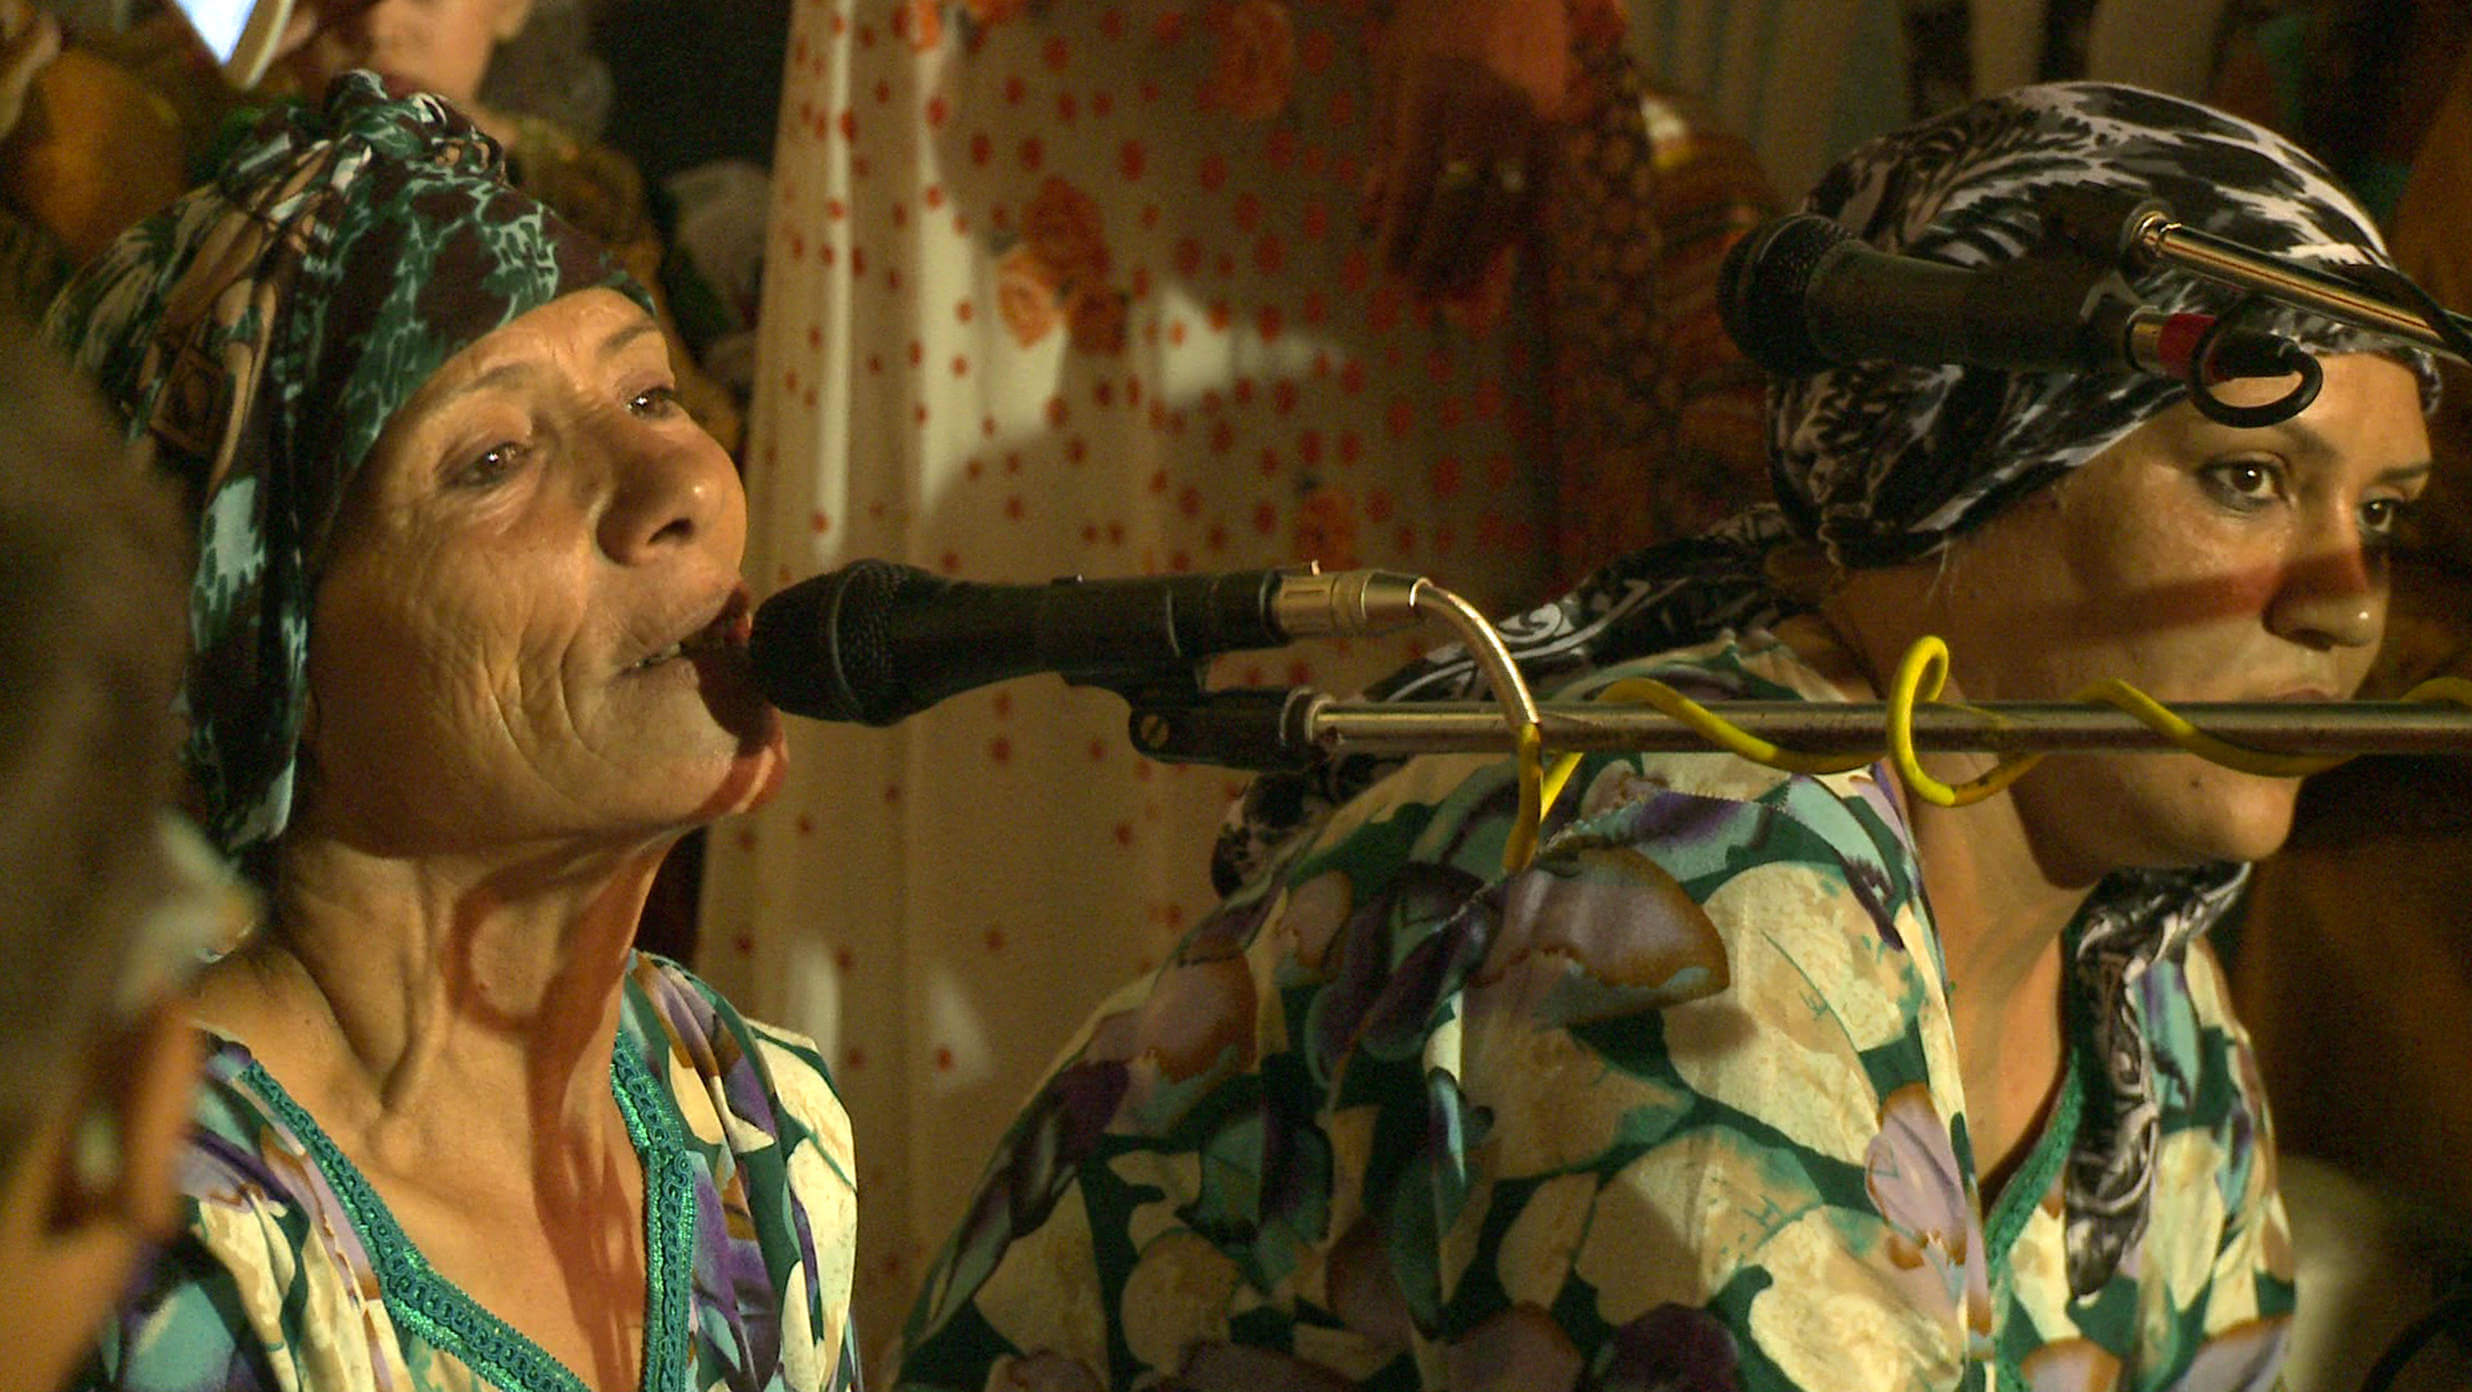 Still from Machtat. Two women in colorful dresses and headwraps. One is singing with a microphone.